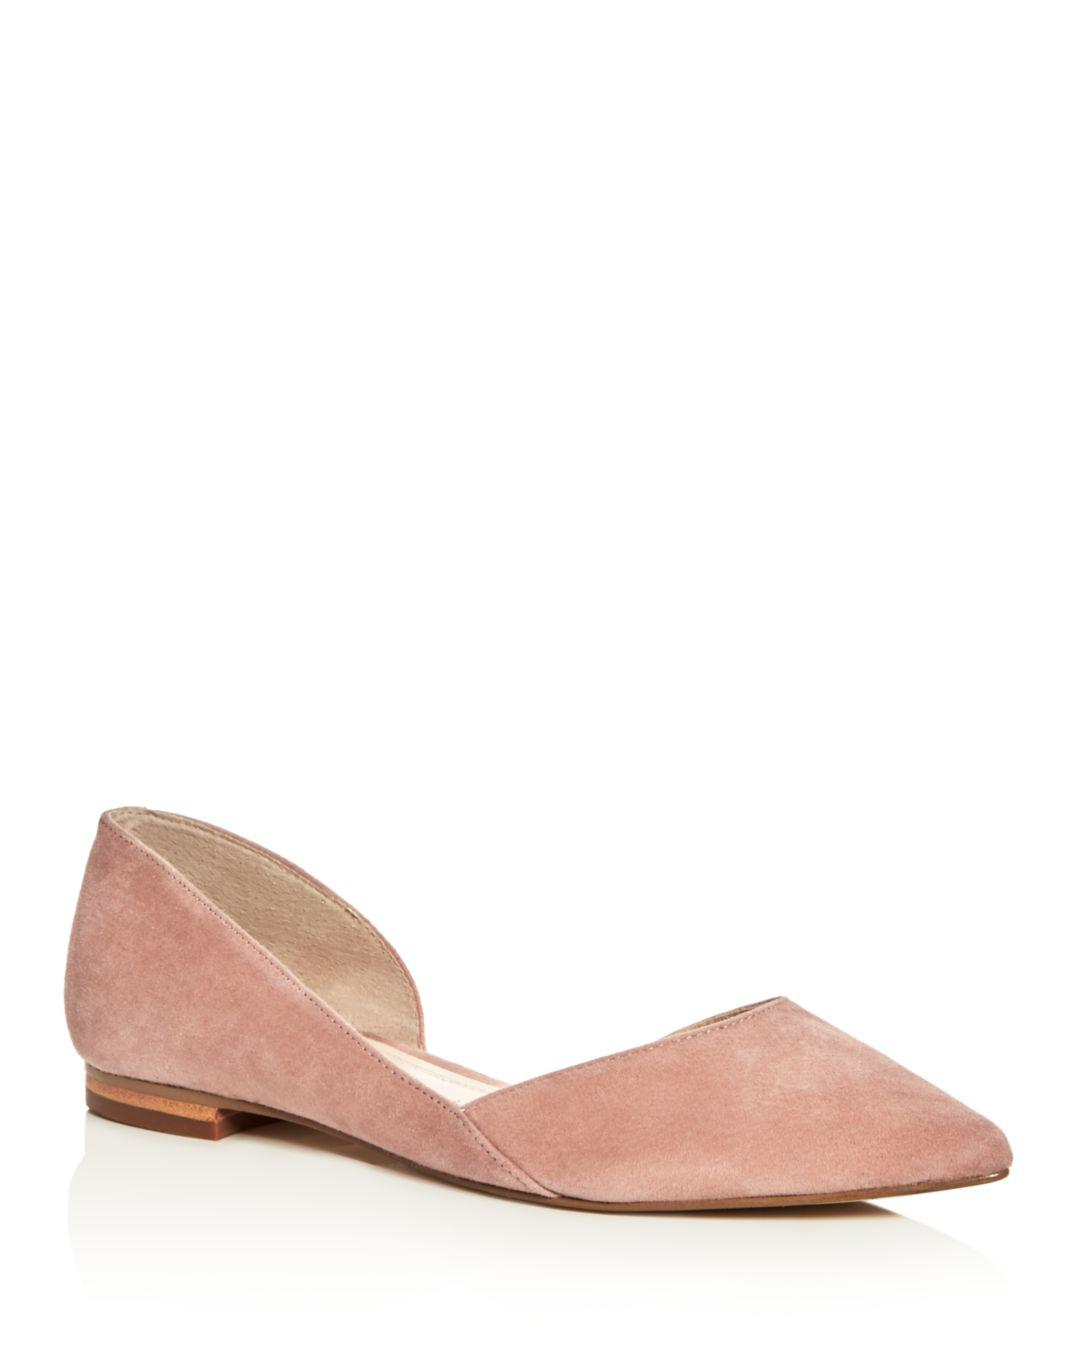 Lyst - Marc Fisher Sunny Suede Pointed Toe D'orsay Flats in Pink - Save ...